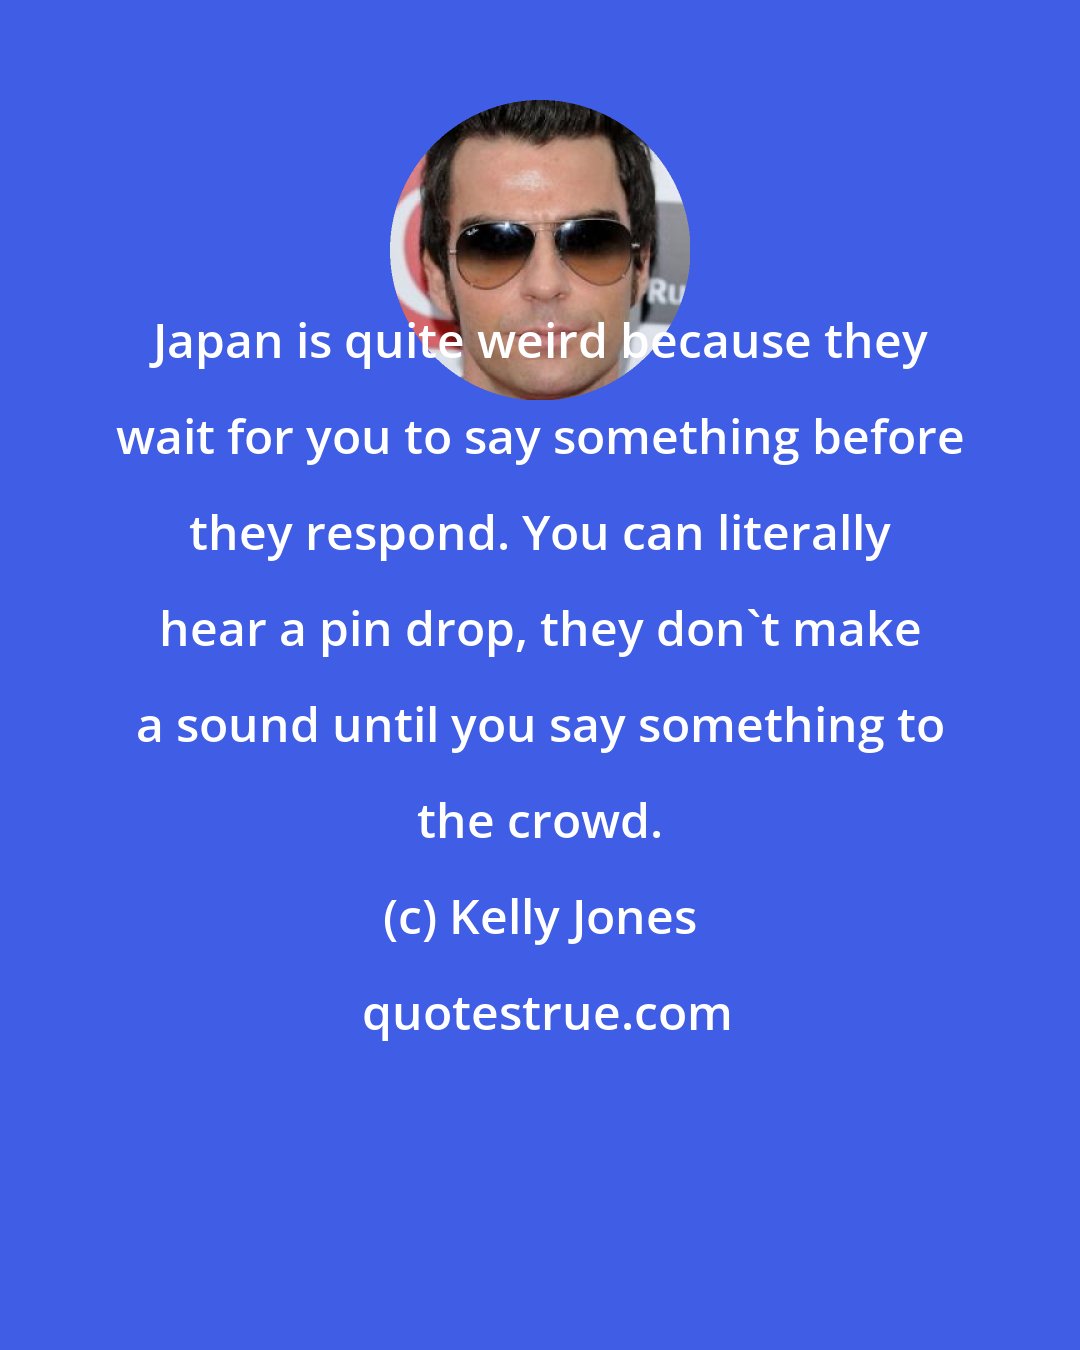 Kelly Jones: Japan is quite weird because they wait for you to say something before they respond. You can literally hear a pin drop, they don't make a sound until you say something to the crowd.